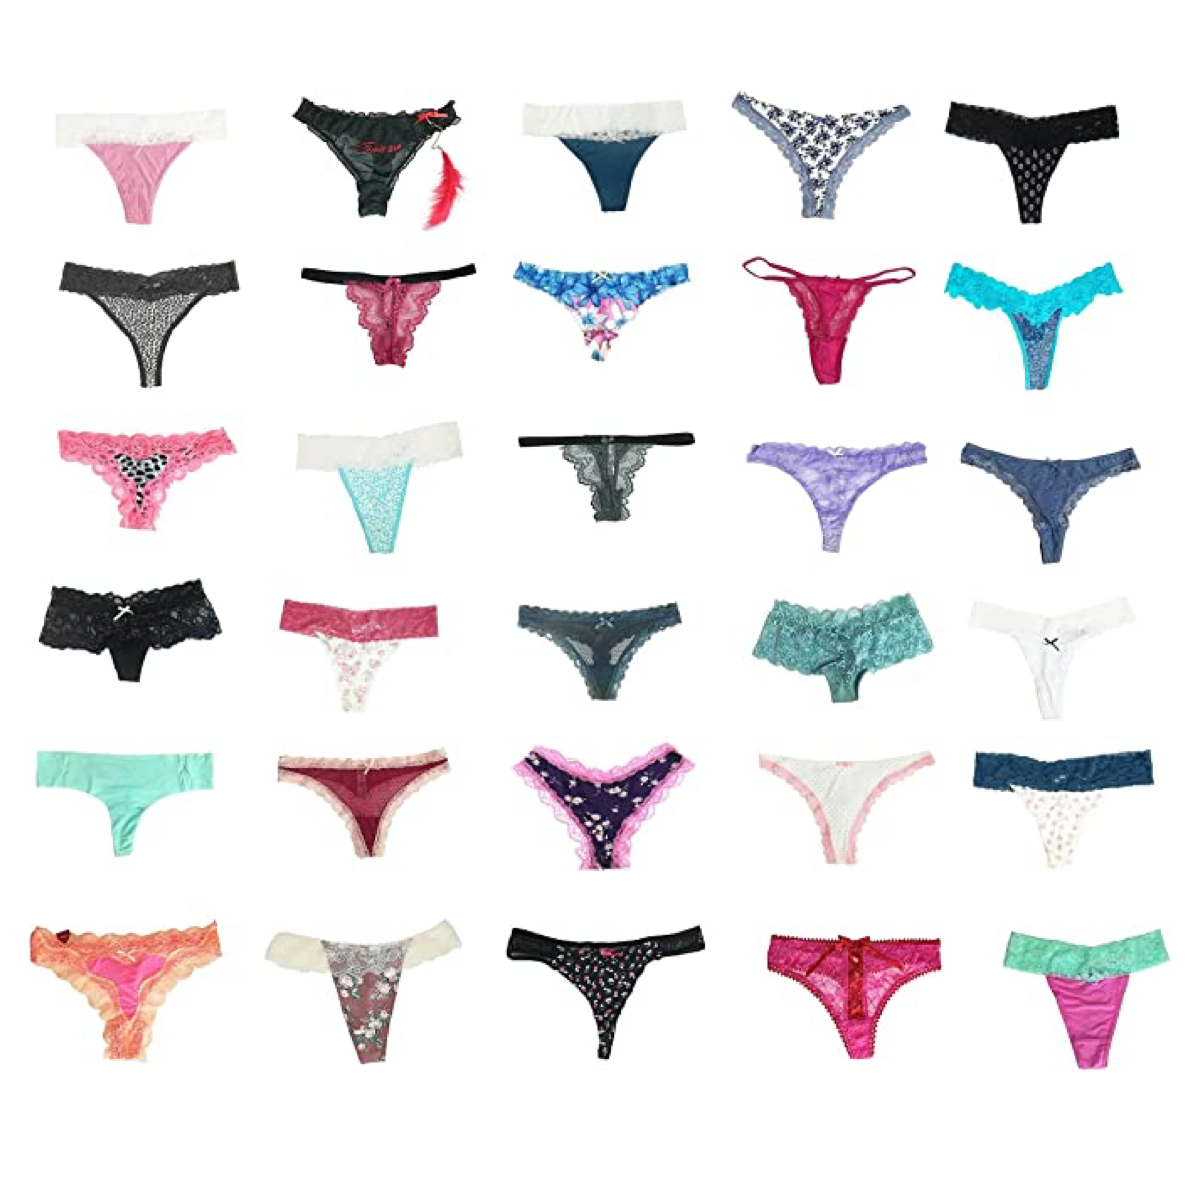 National Underwear Day 2022, Where Loves Thongs The Most